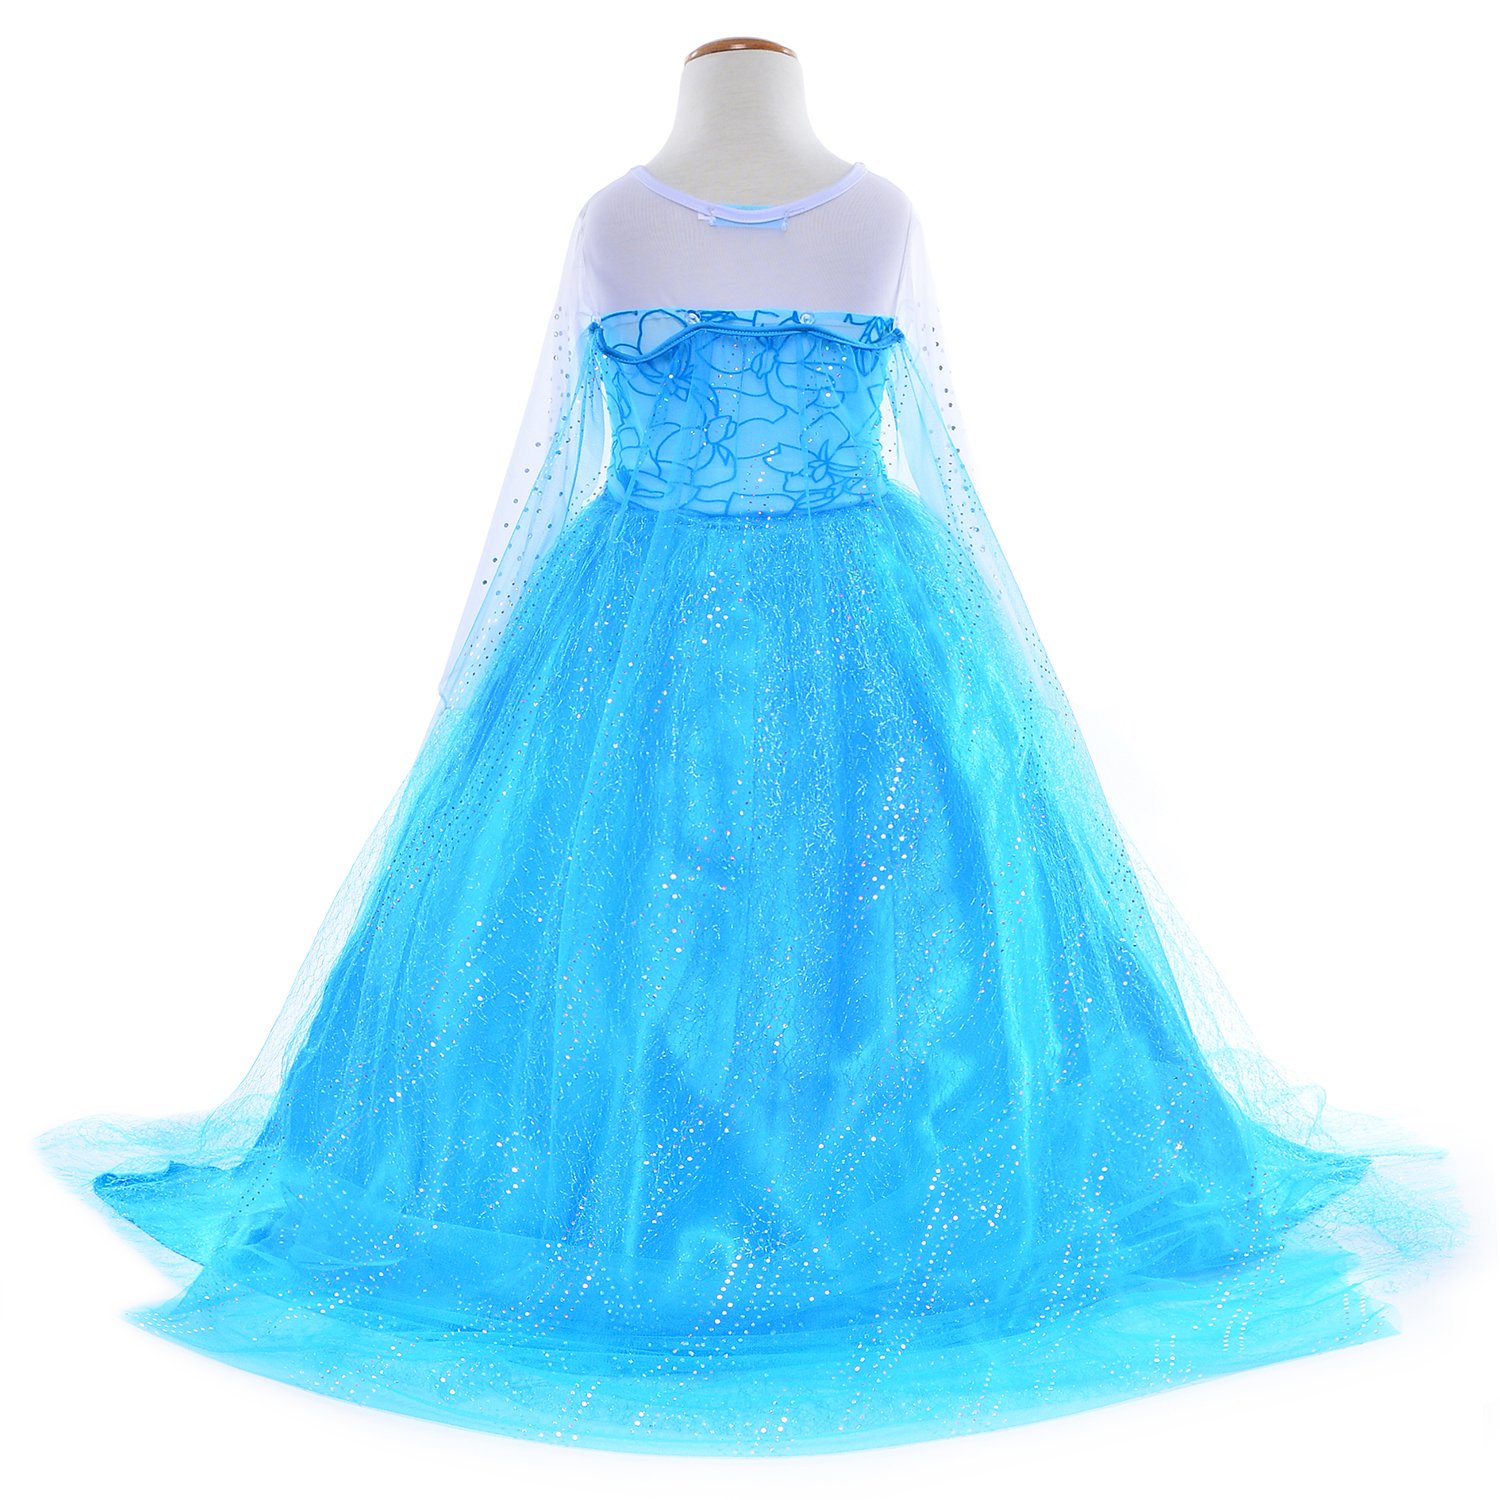 Party Chili Princess Costumes Birthday Party Dress Up For Little Girls with Accessories